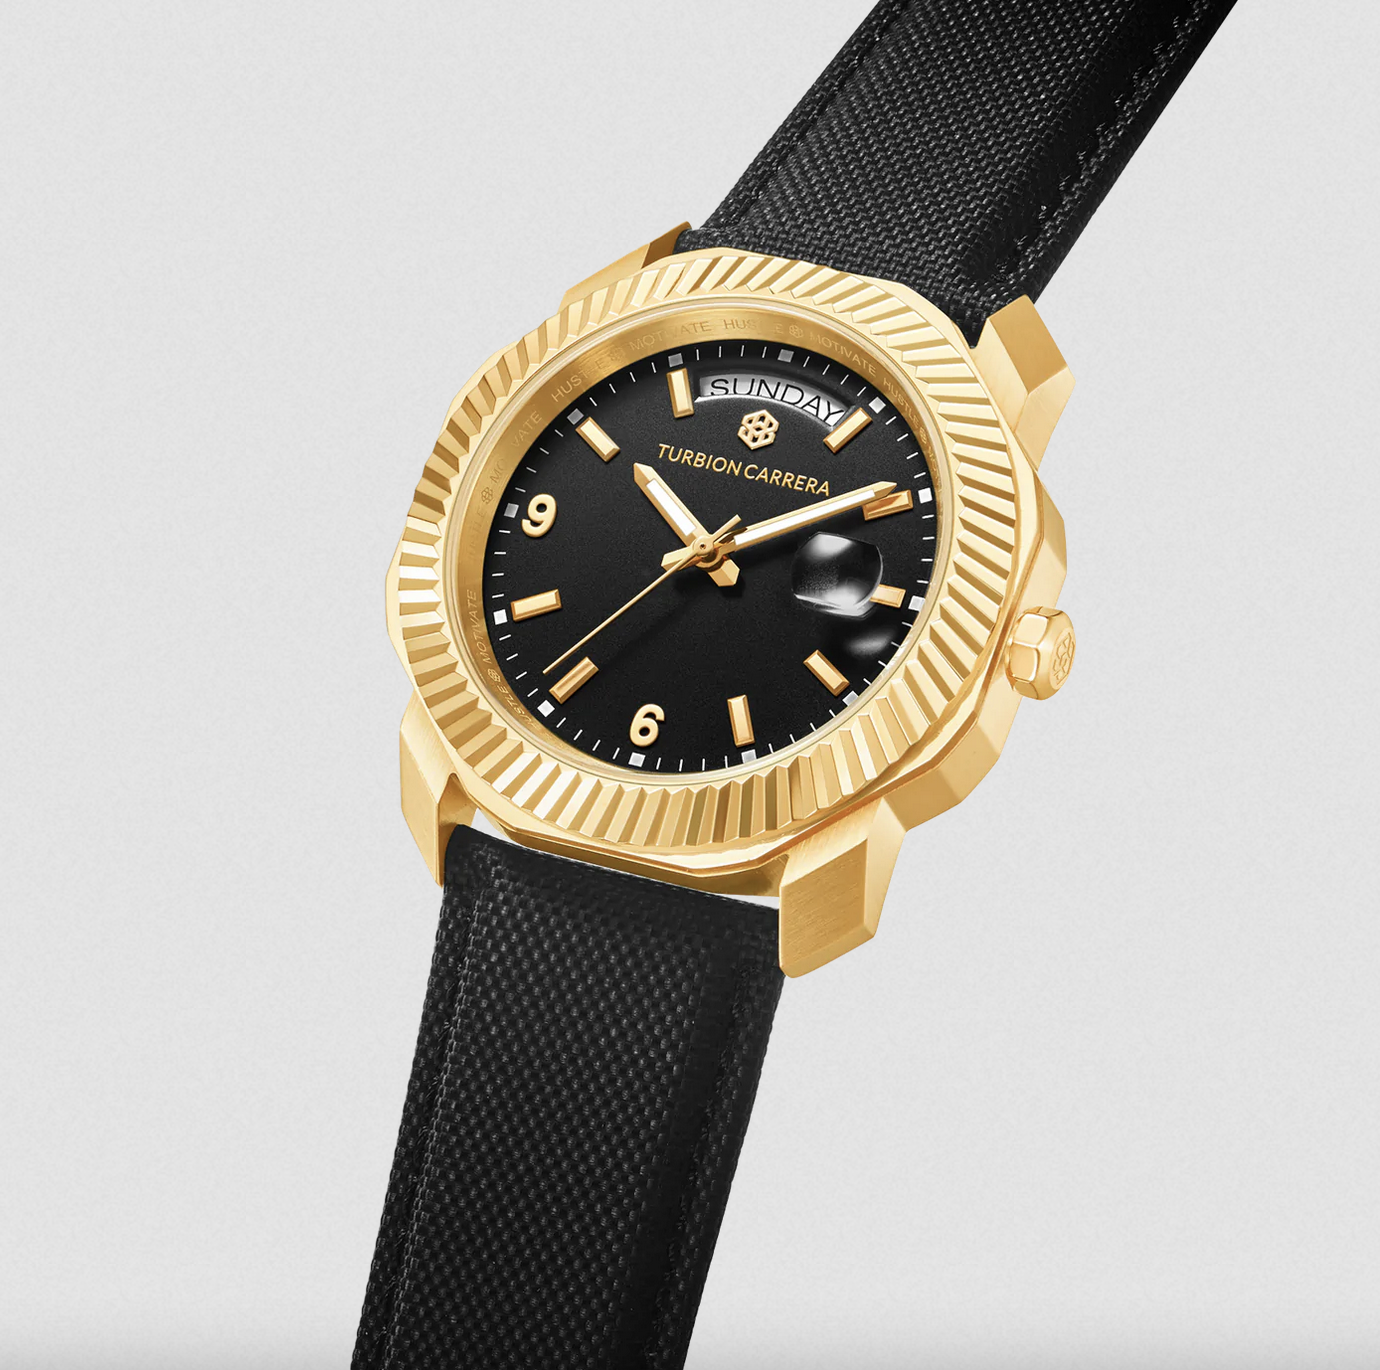 Introducing the Turbion Carrera Excellence Day-Date (Gold and Black)